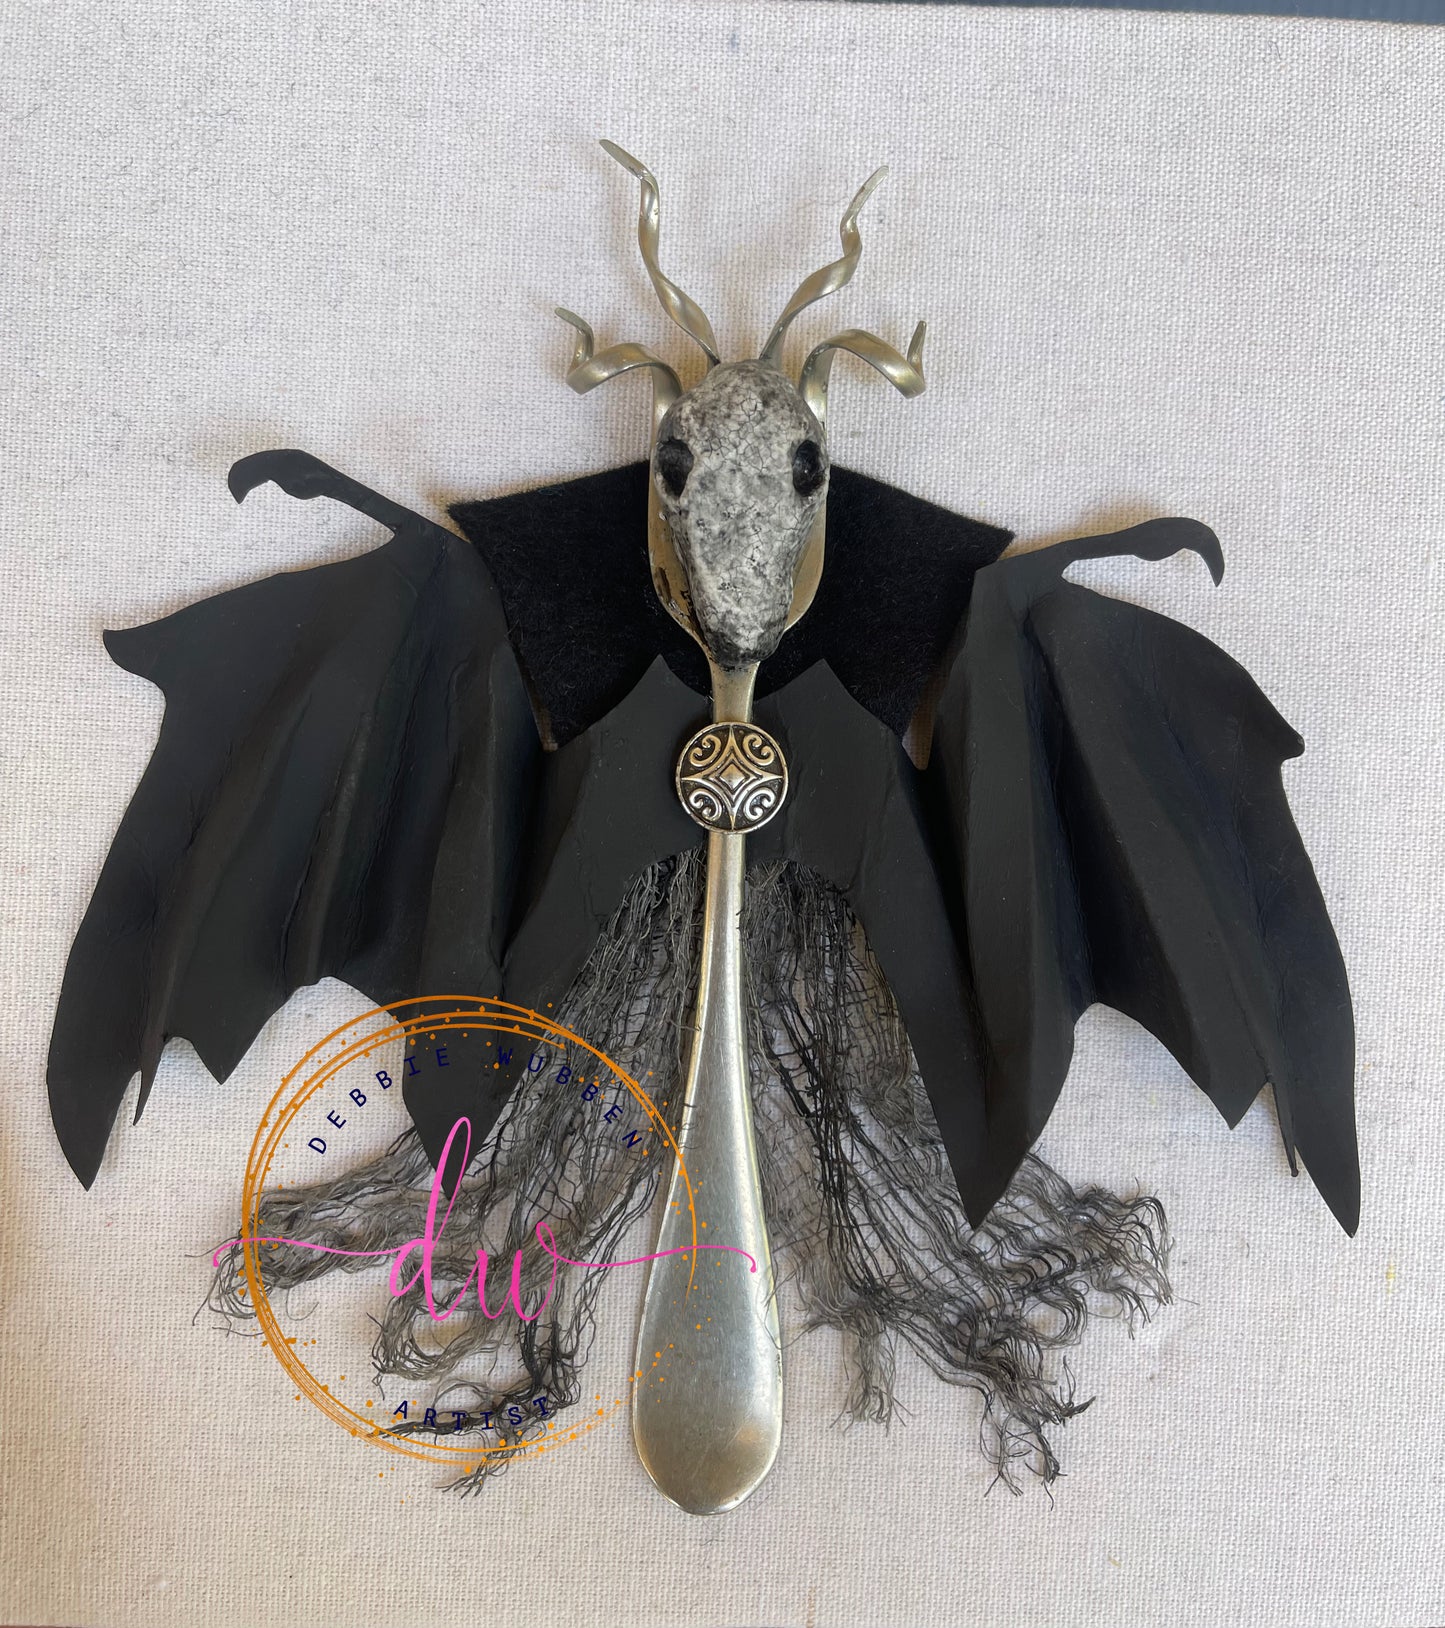 "Silverwing" goat-creature 4 vintage silver